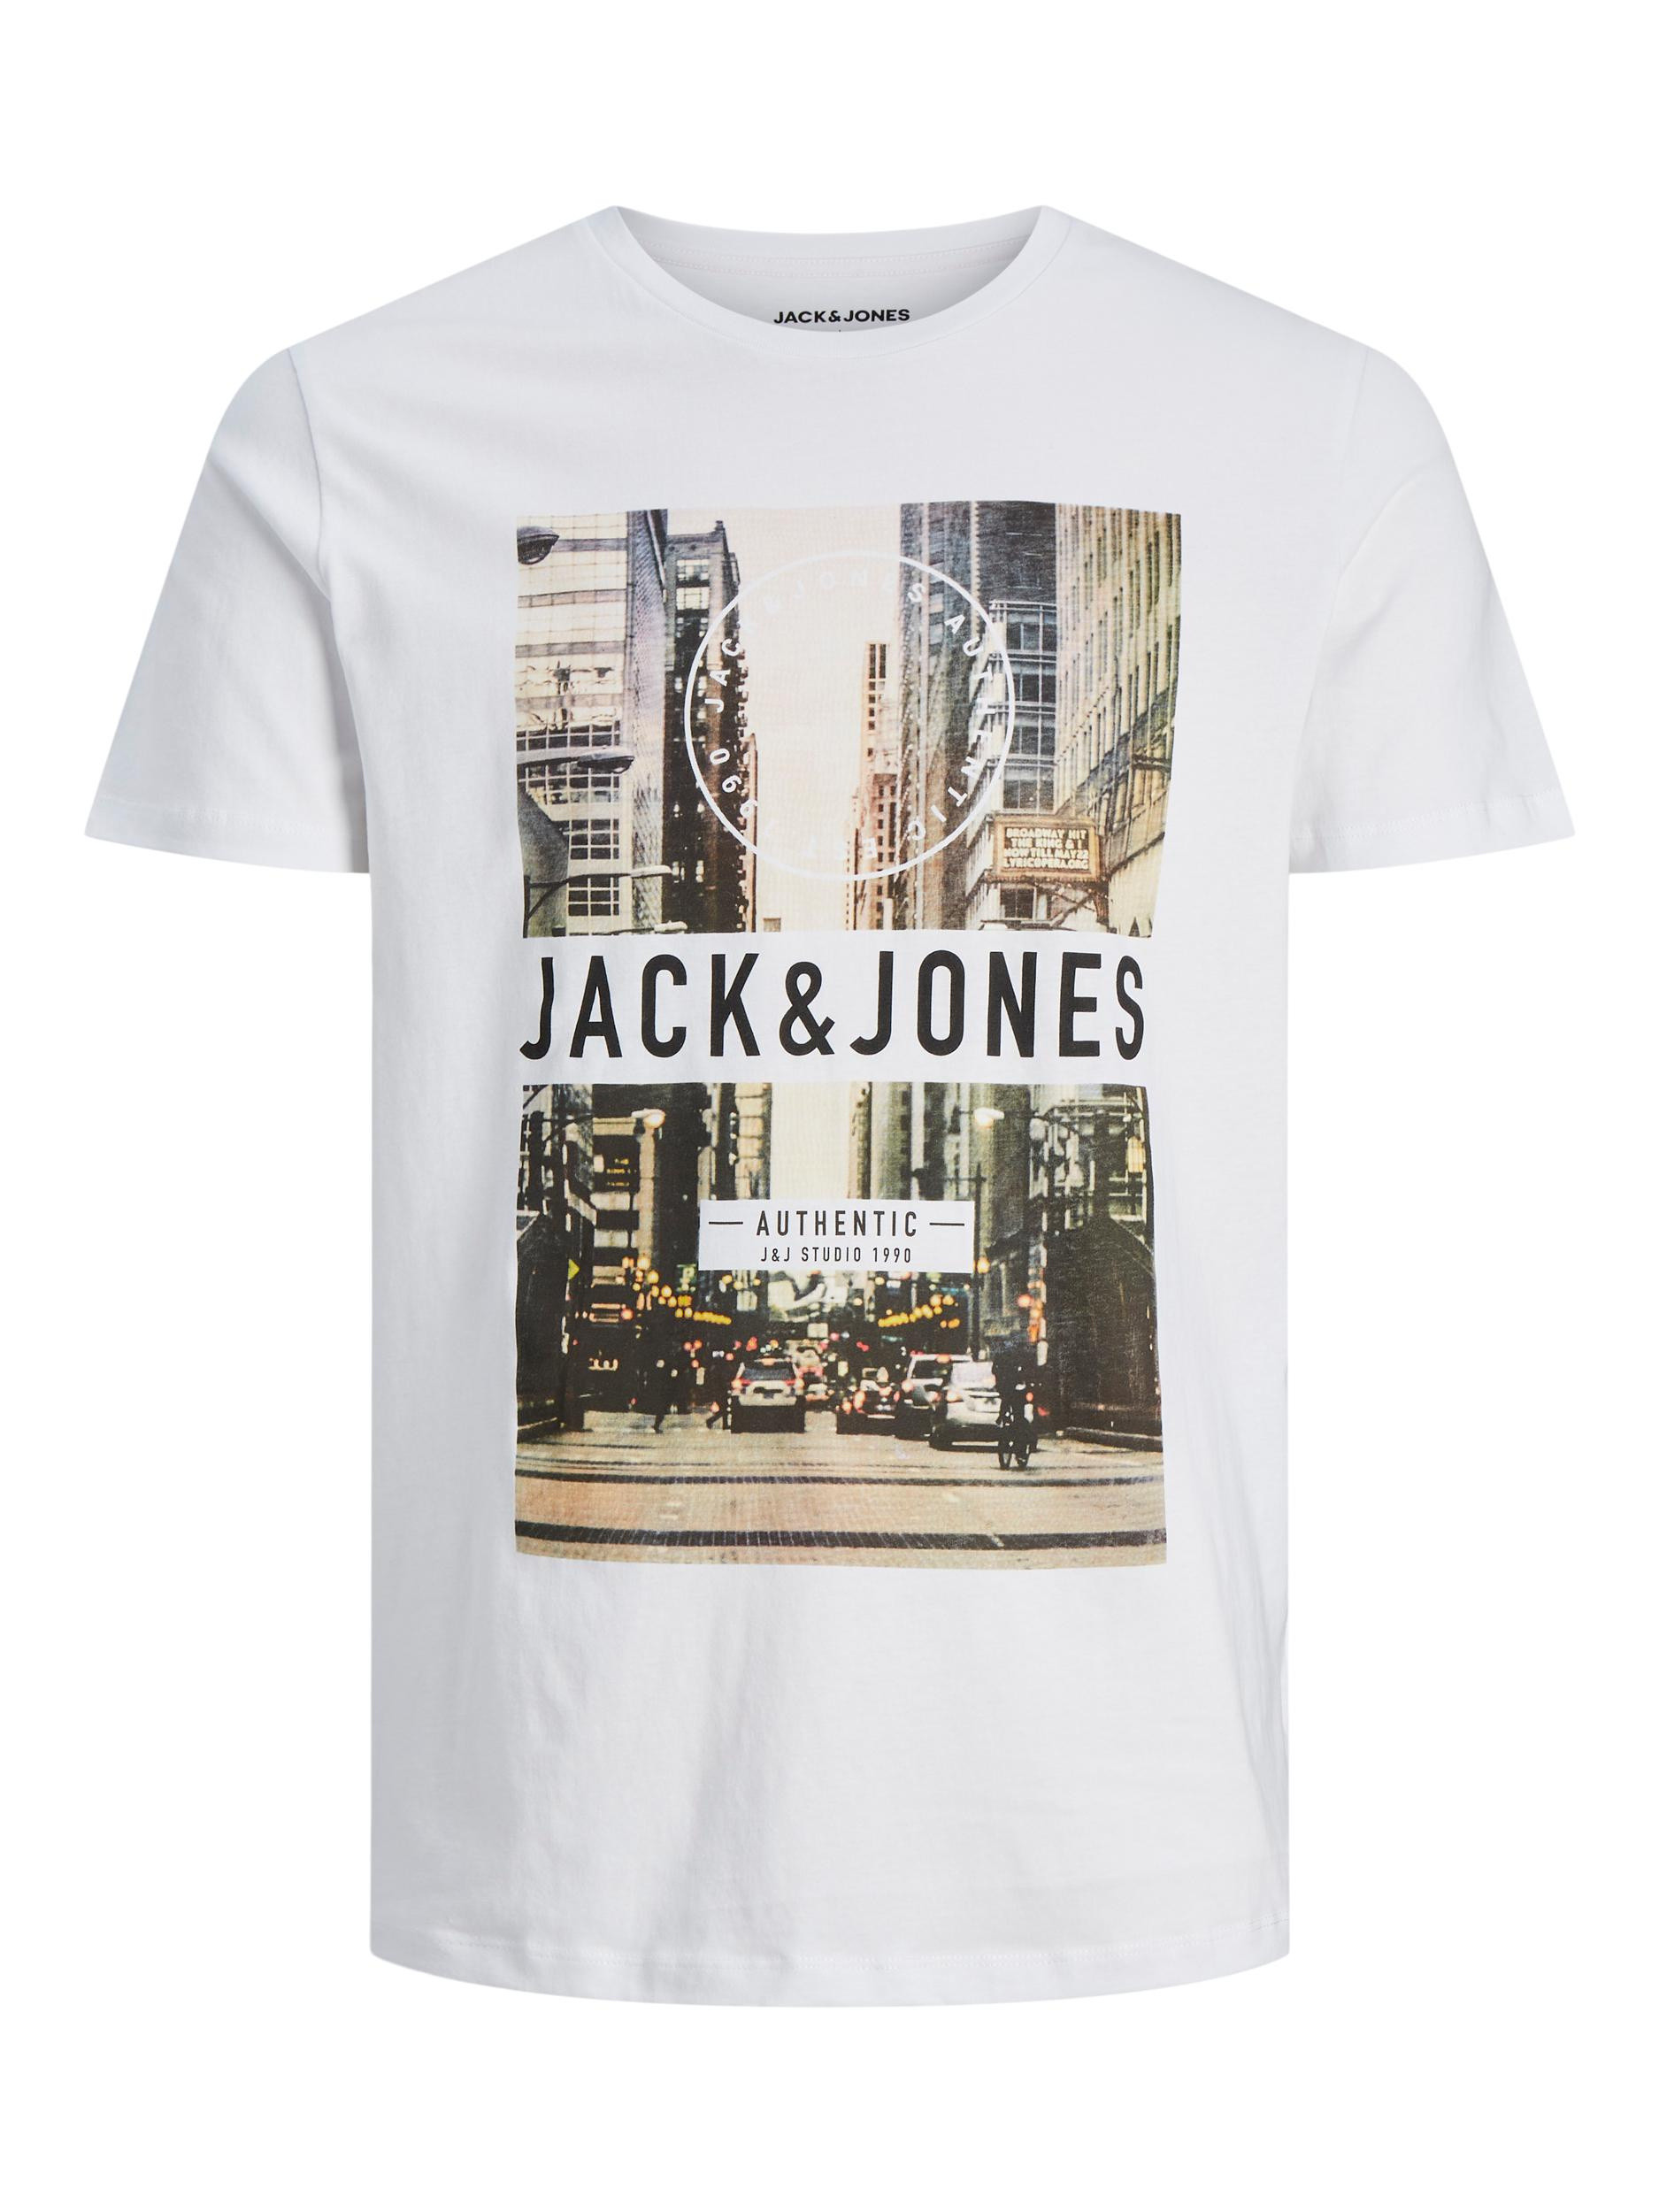 Jack & Jones -T-shirt in cotone con stampa, Bianco, large image number 0